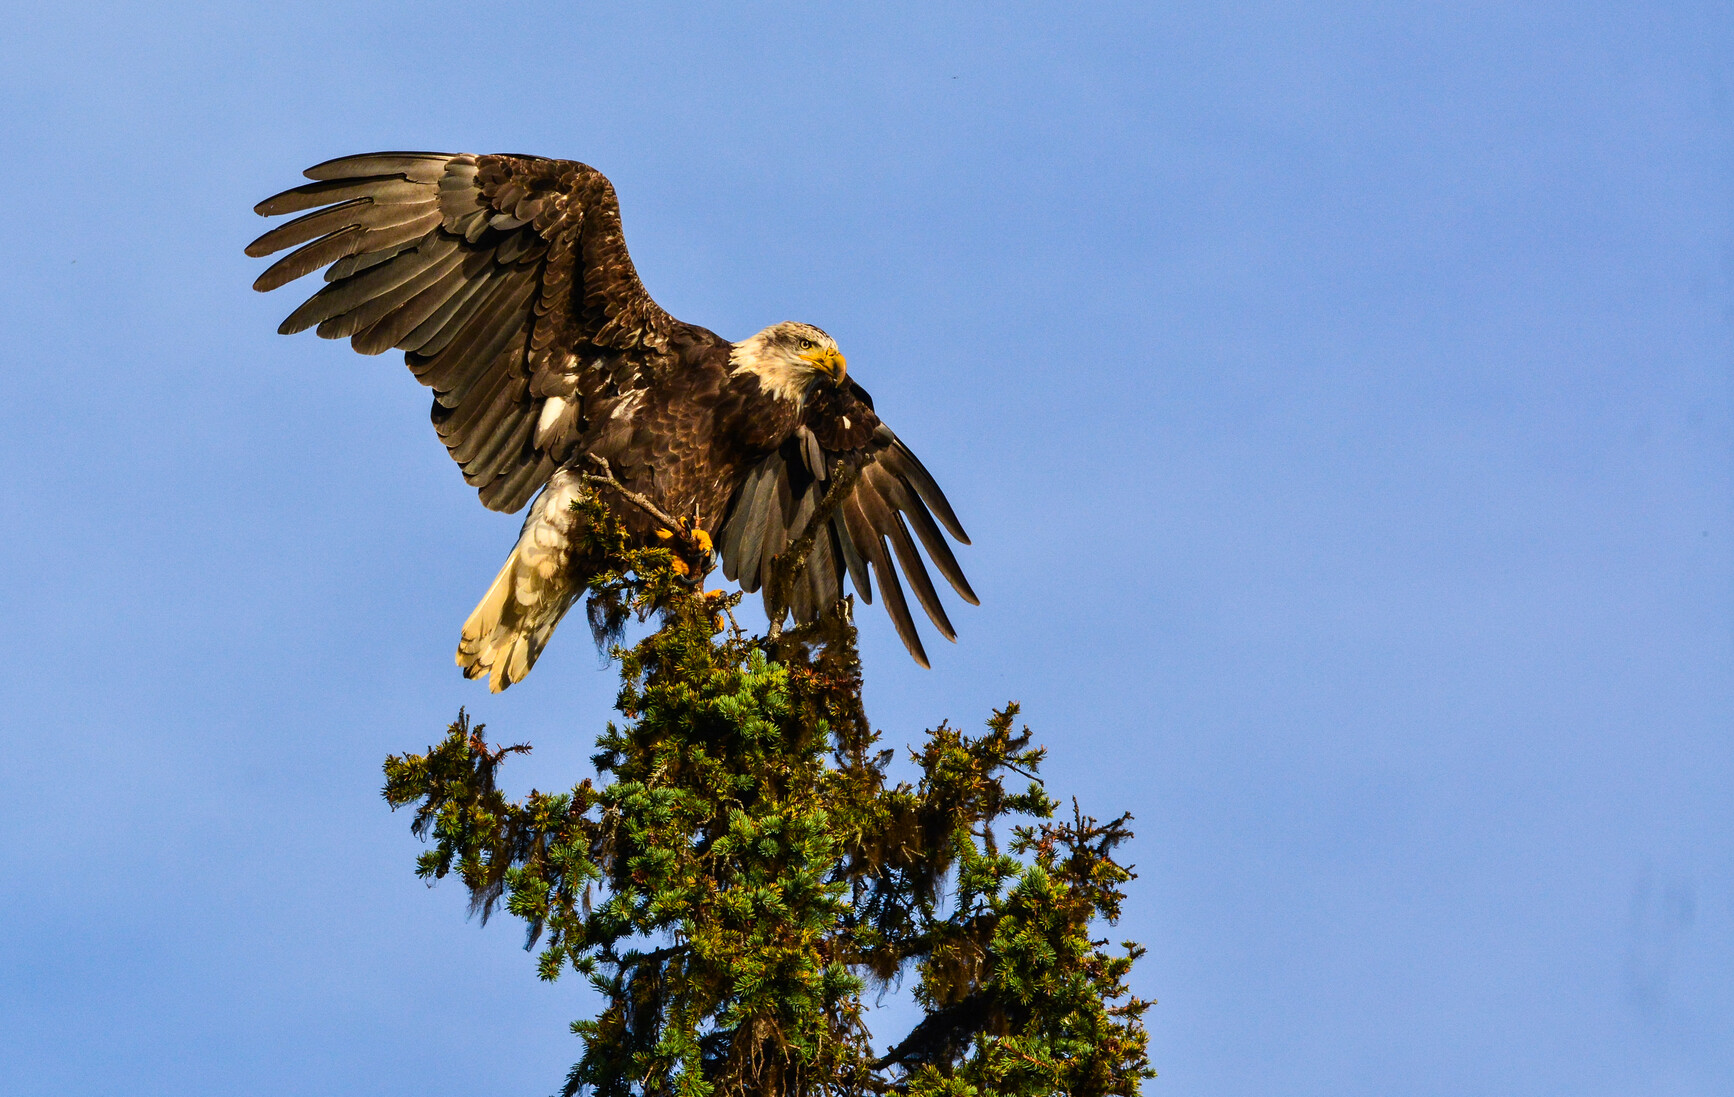 An eagle at the top of a tree with it's wings spread.